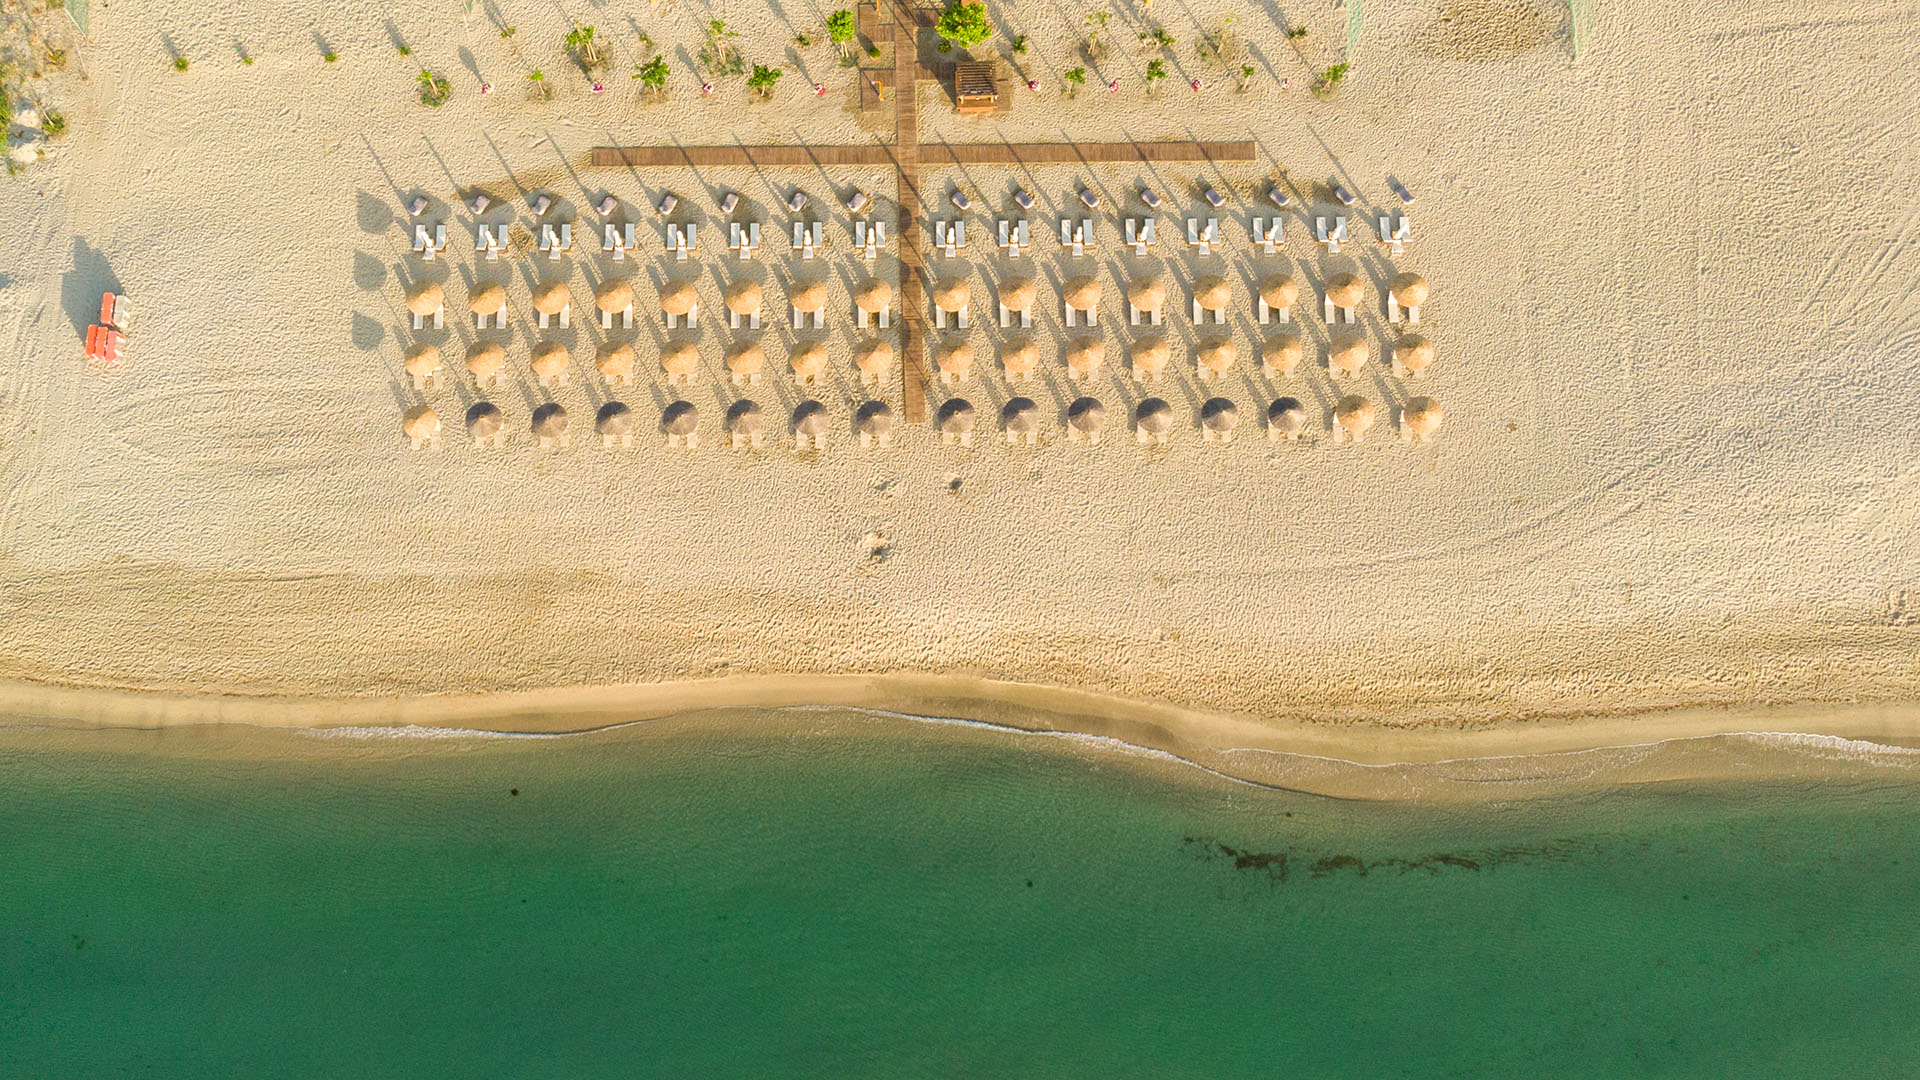 Katerini Beach from above.